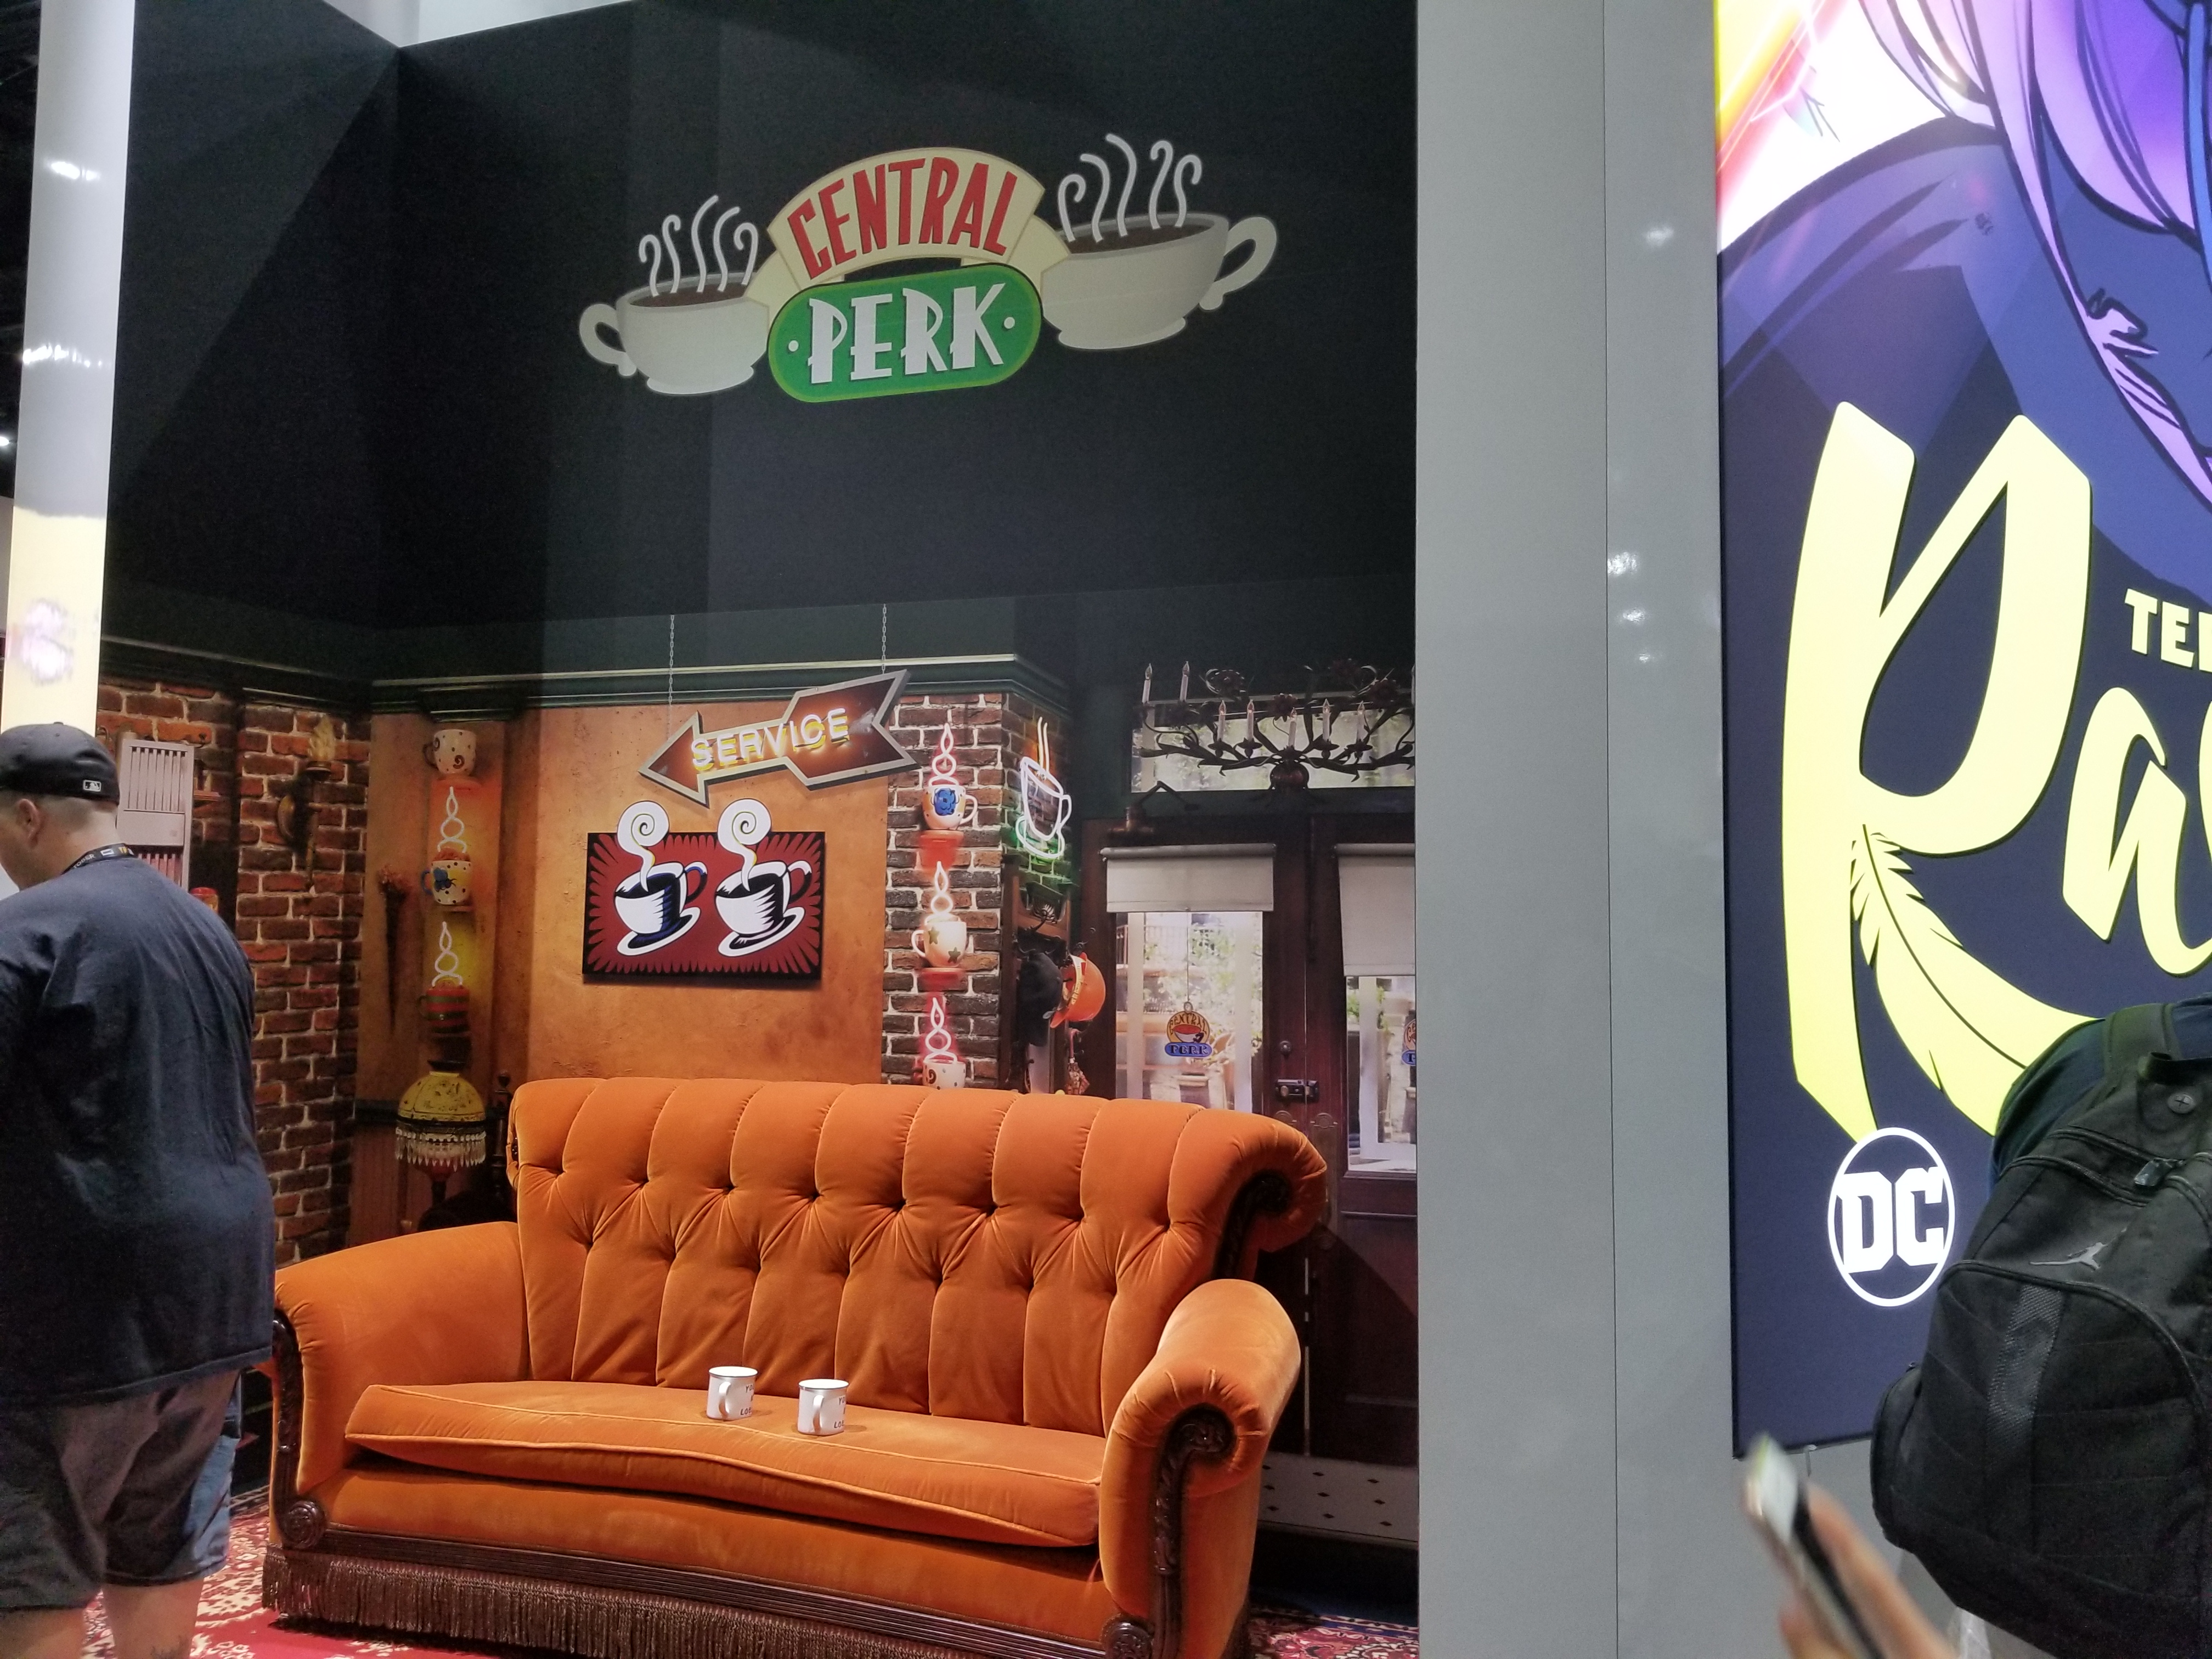 Central Perk couch at DC booth